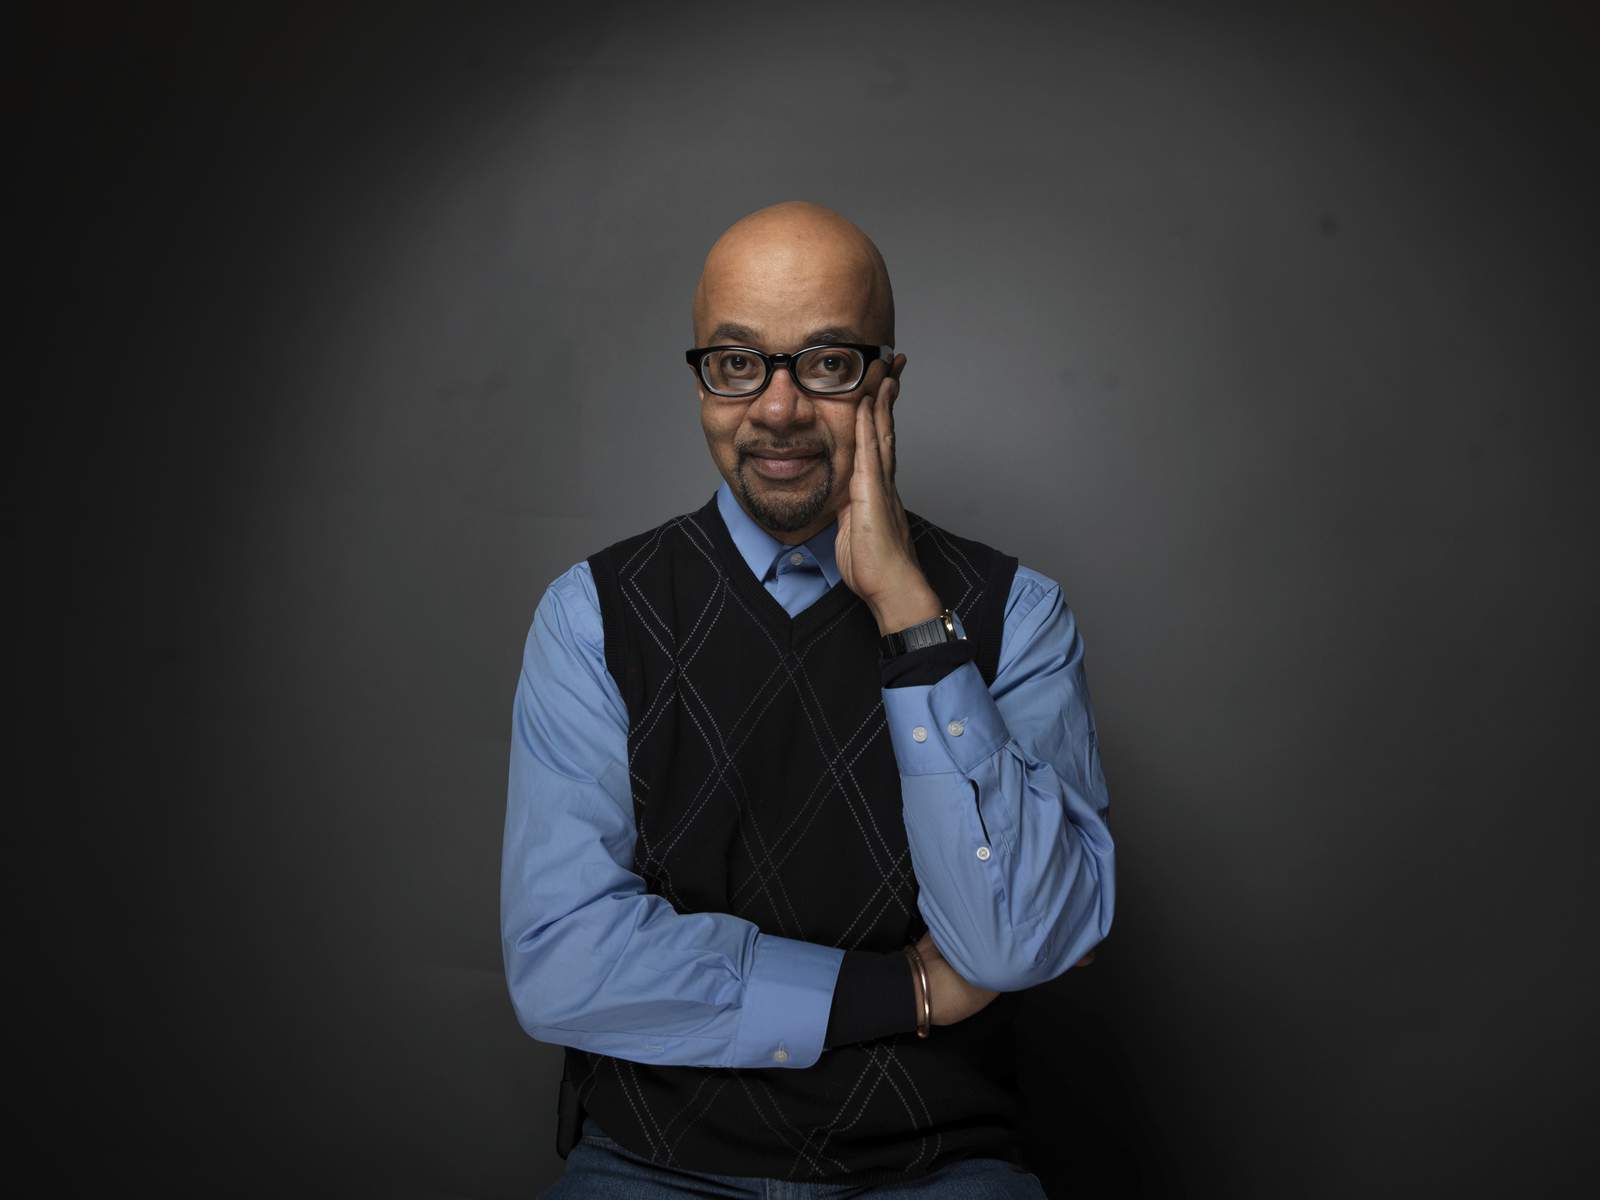 James McBride among those honored by Center for Fiction